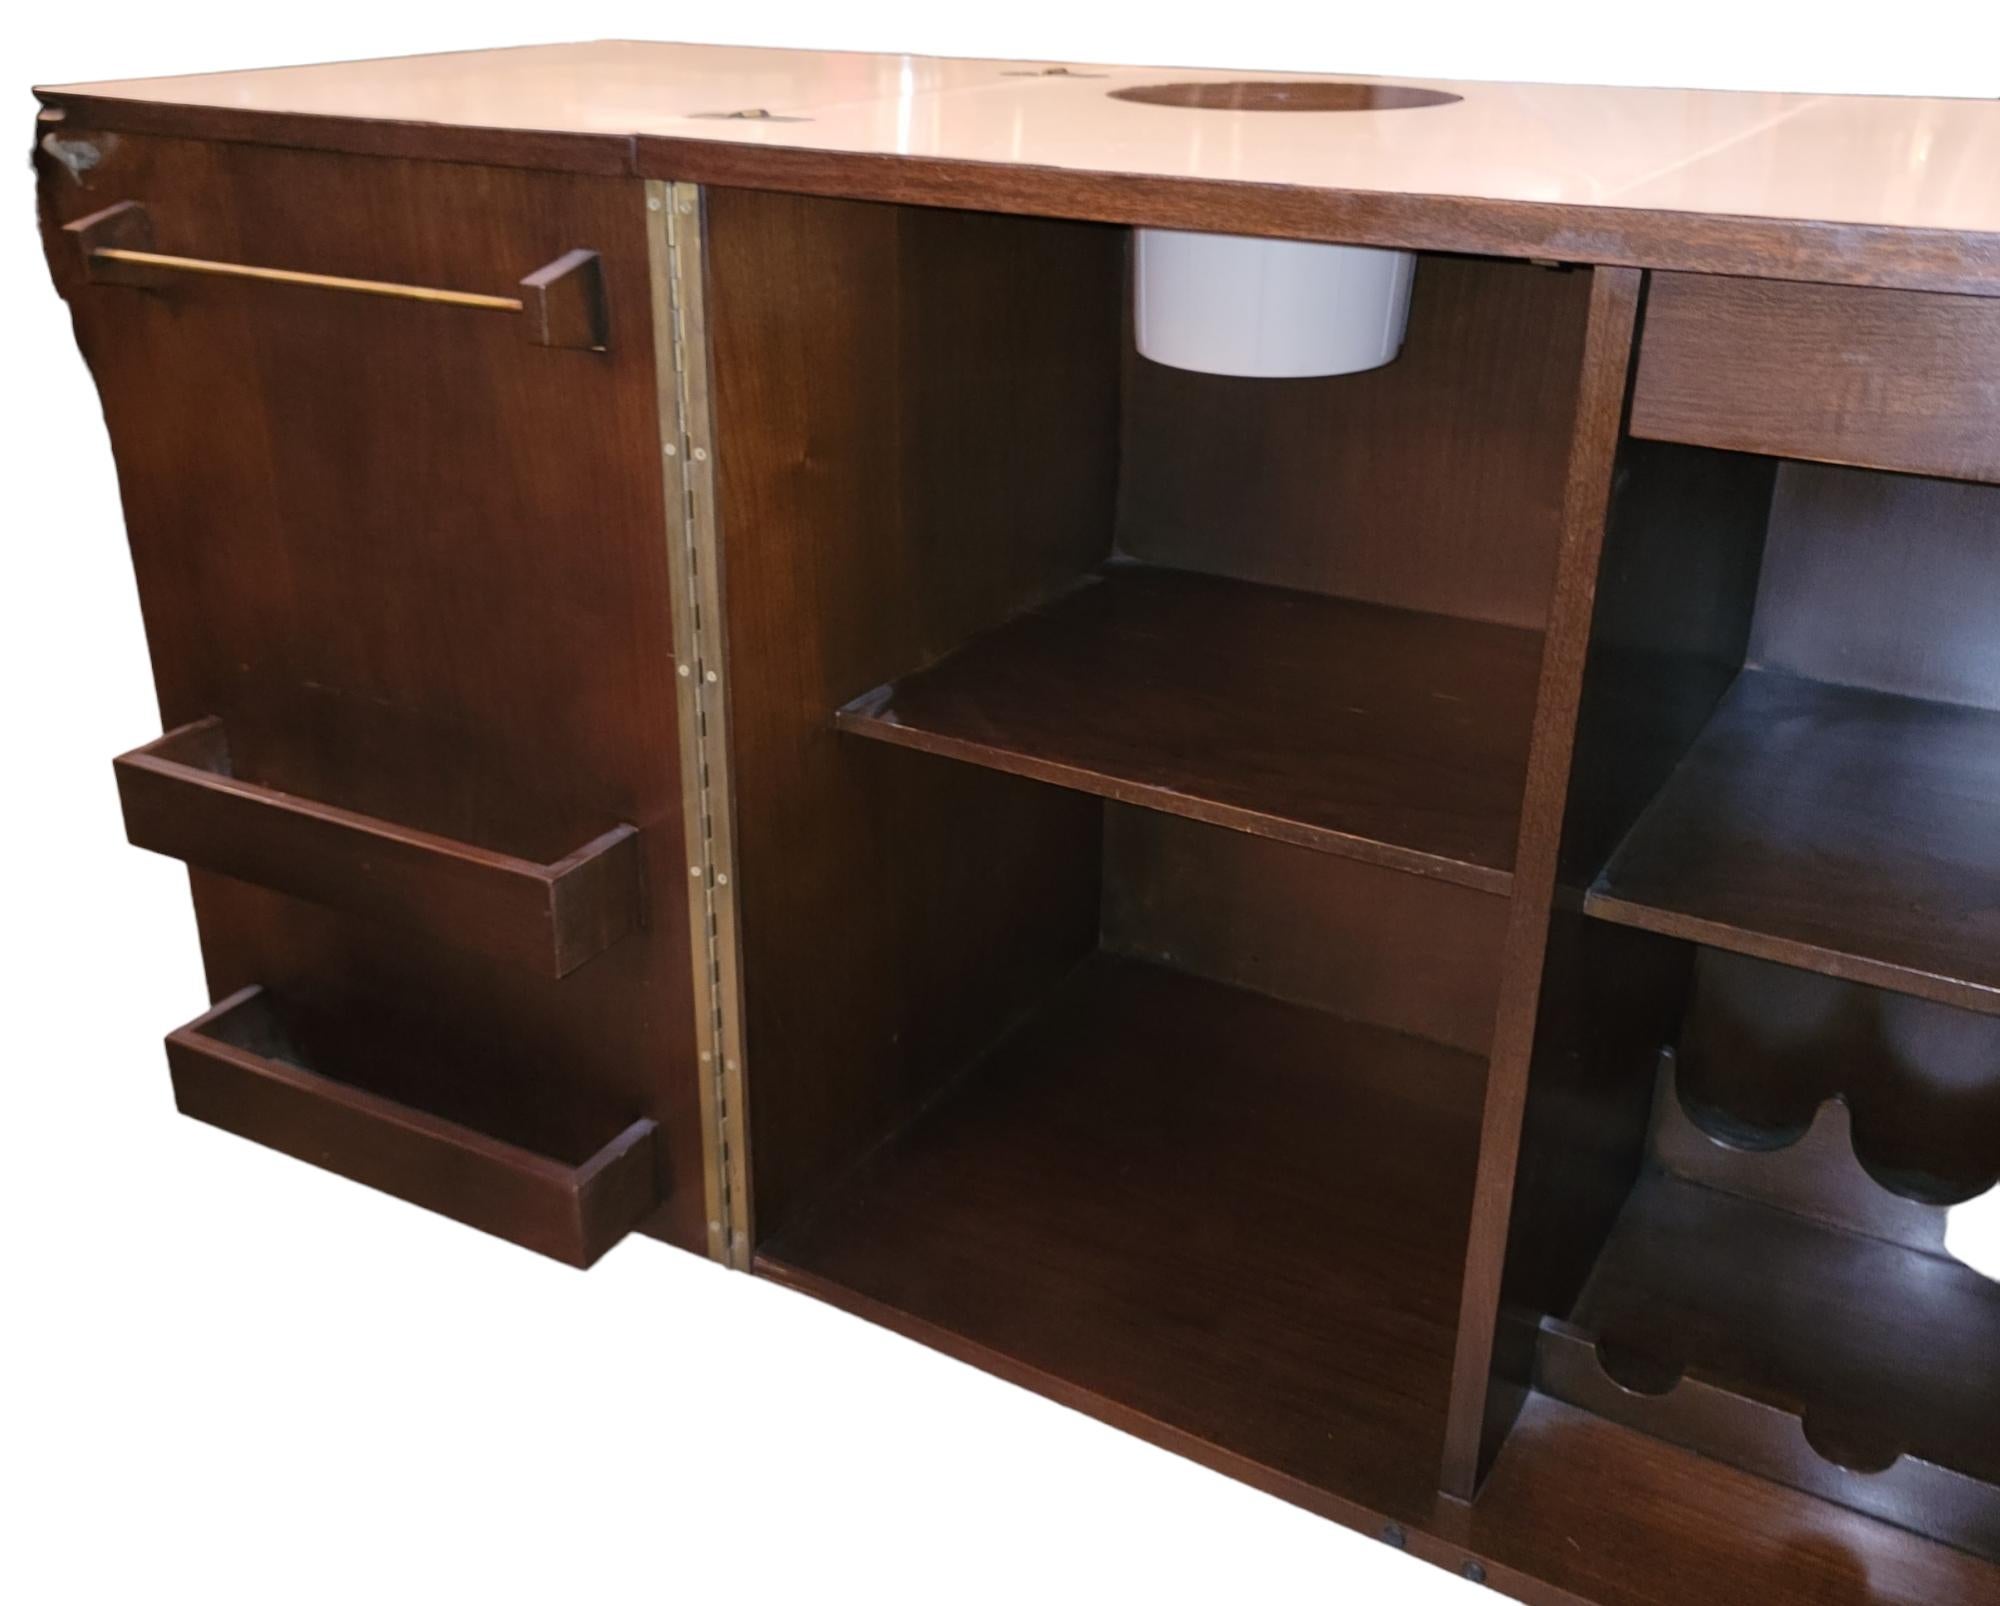 Classic midcentury Fold Out Bar. The bar opens up to old wine bottles as well as 2 shelfs on the interior with different compartments to hold all types of drinks and drink accessories. There is also a ice bucket underneath the left fold. Folded in